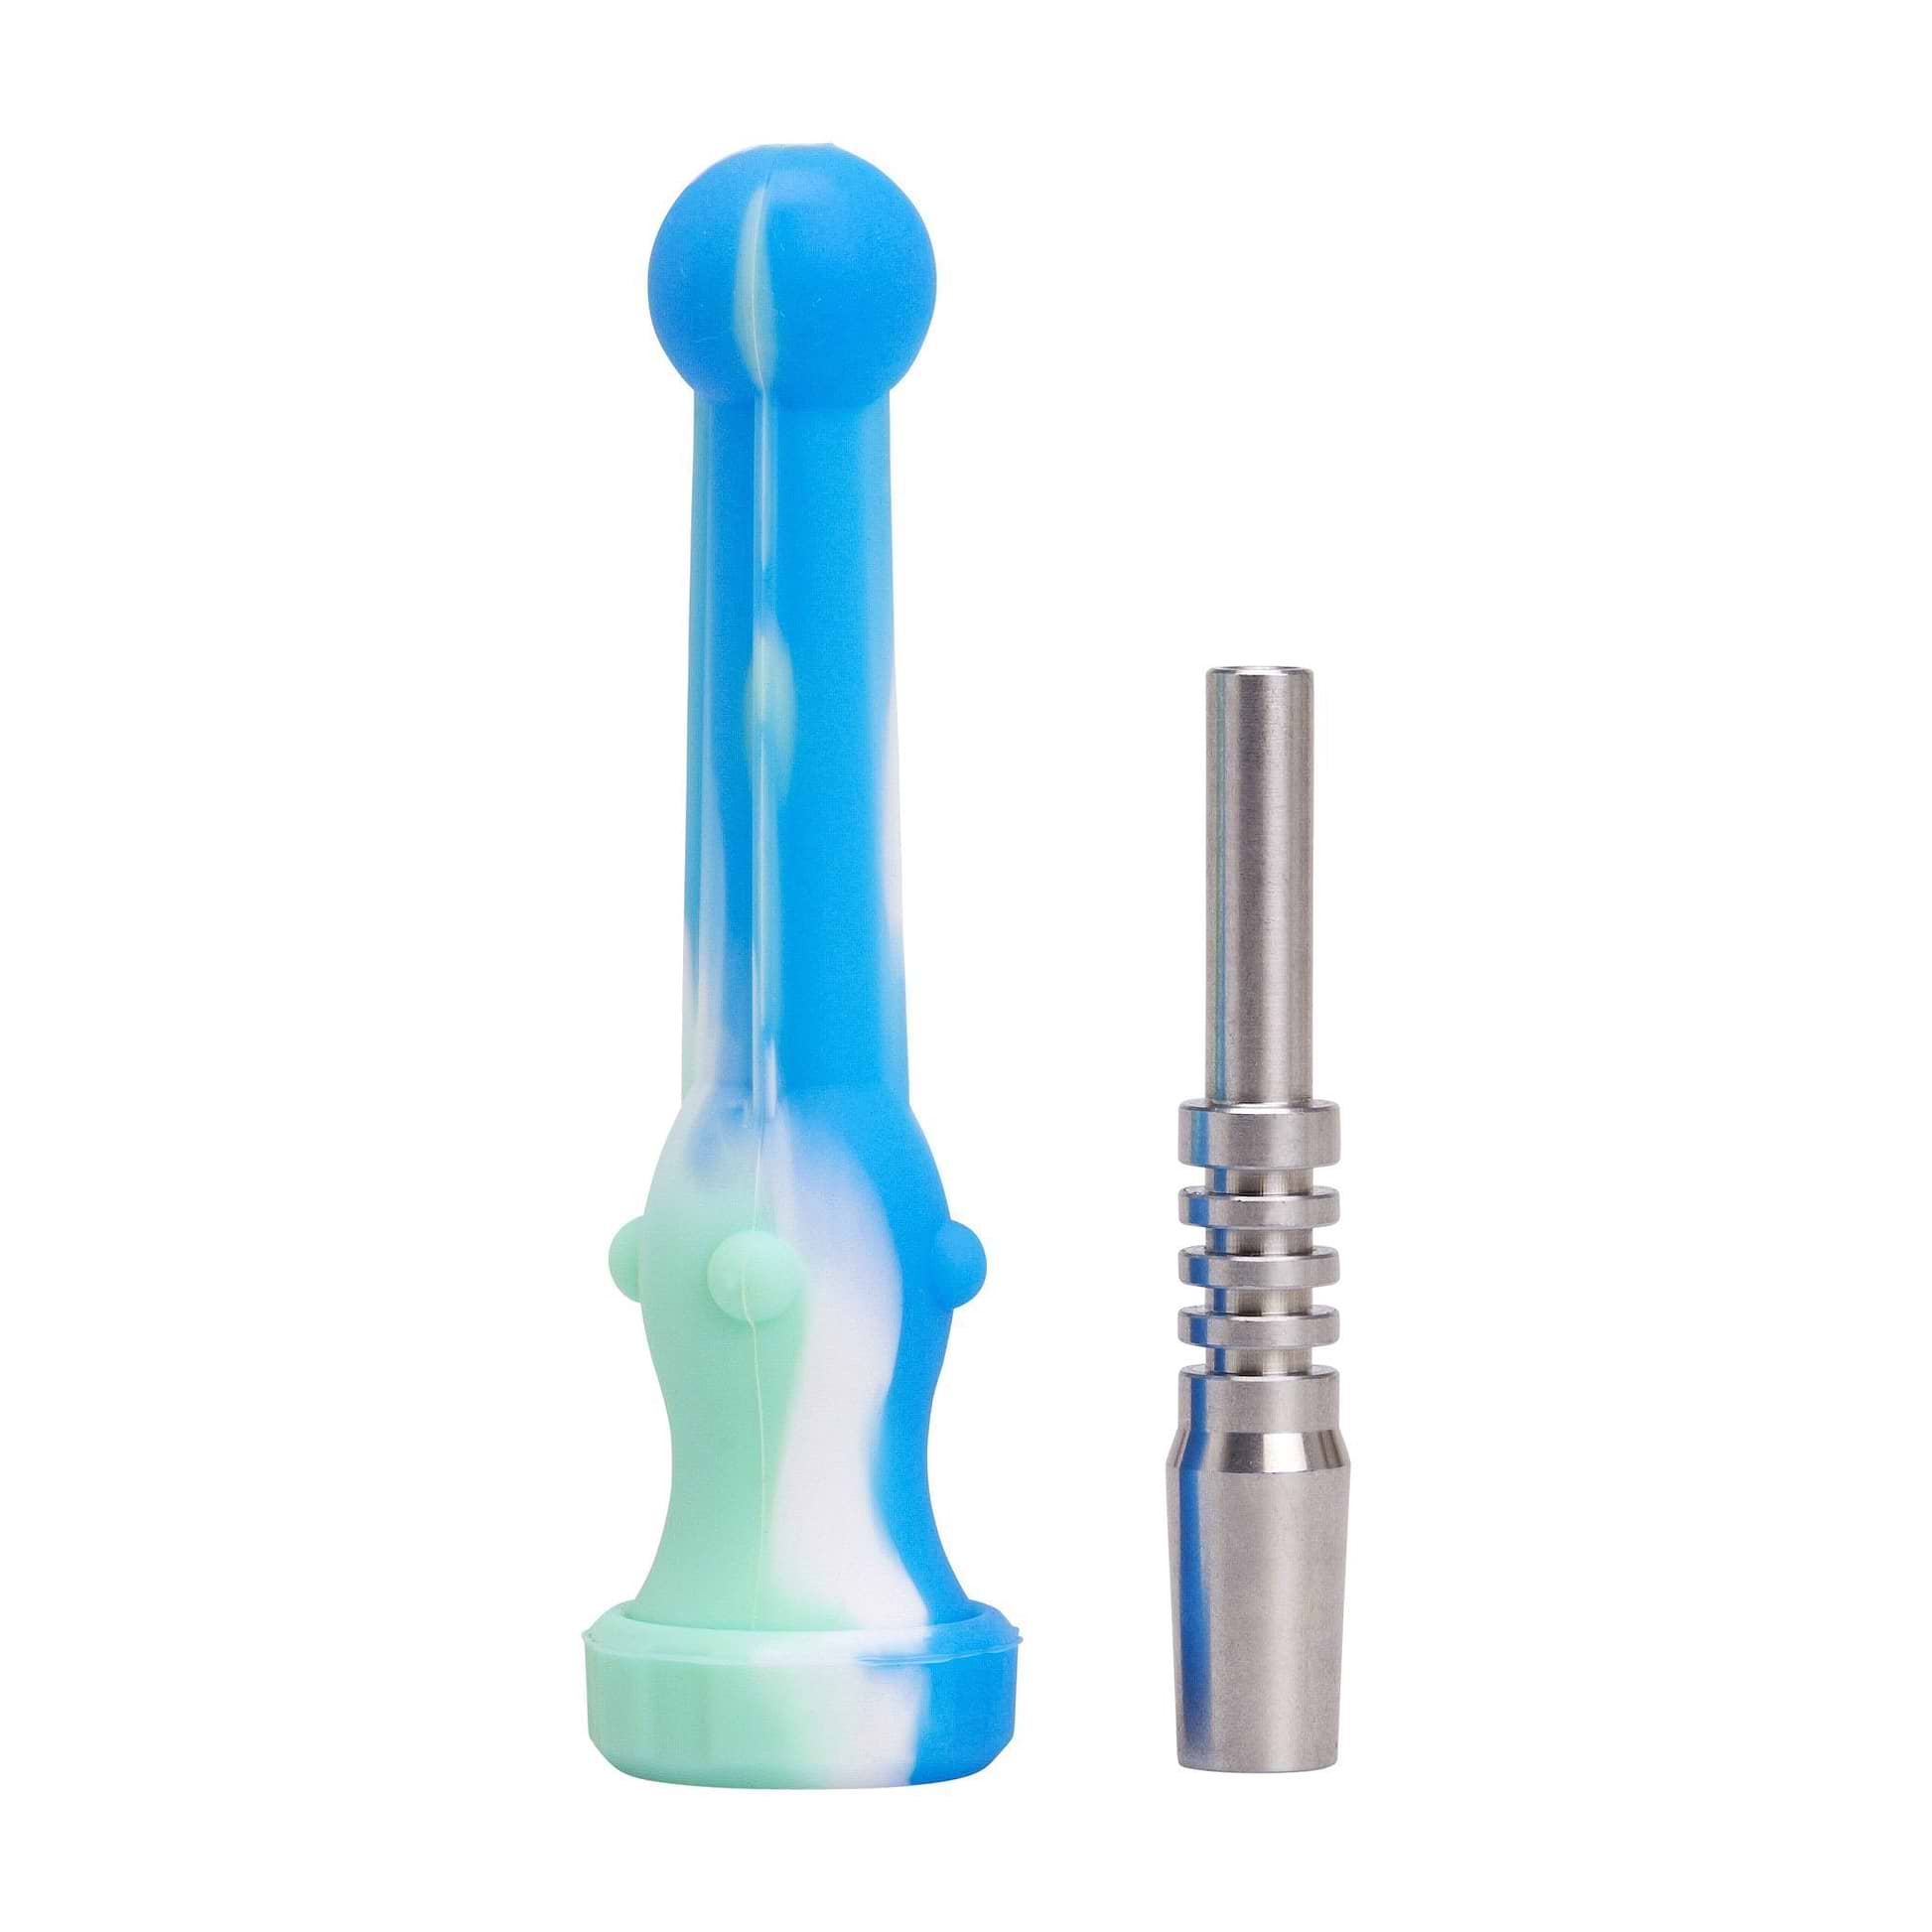 Cute silicone covering for metal nectar collector smoking accessory easy-to-use swirling colors